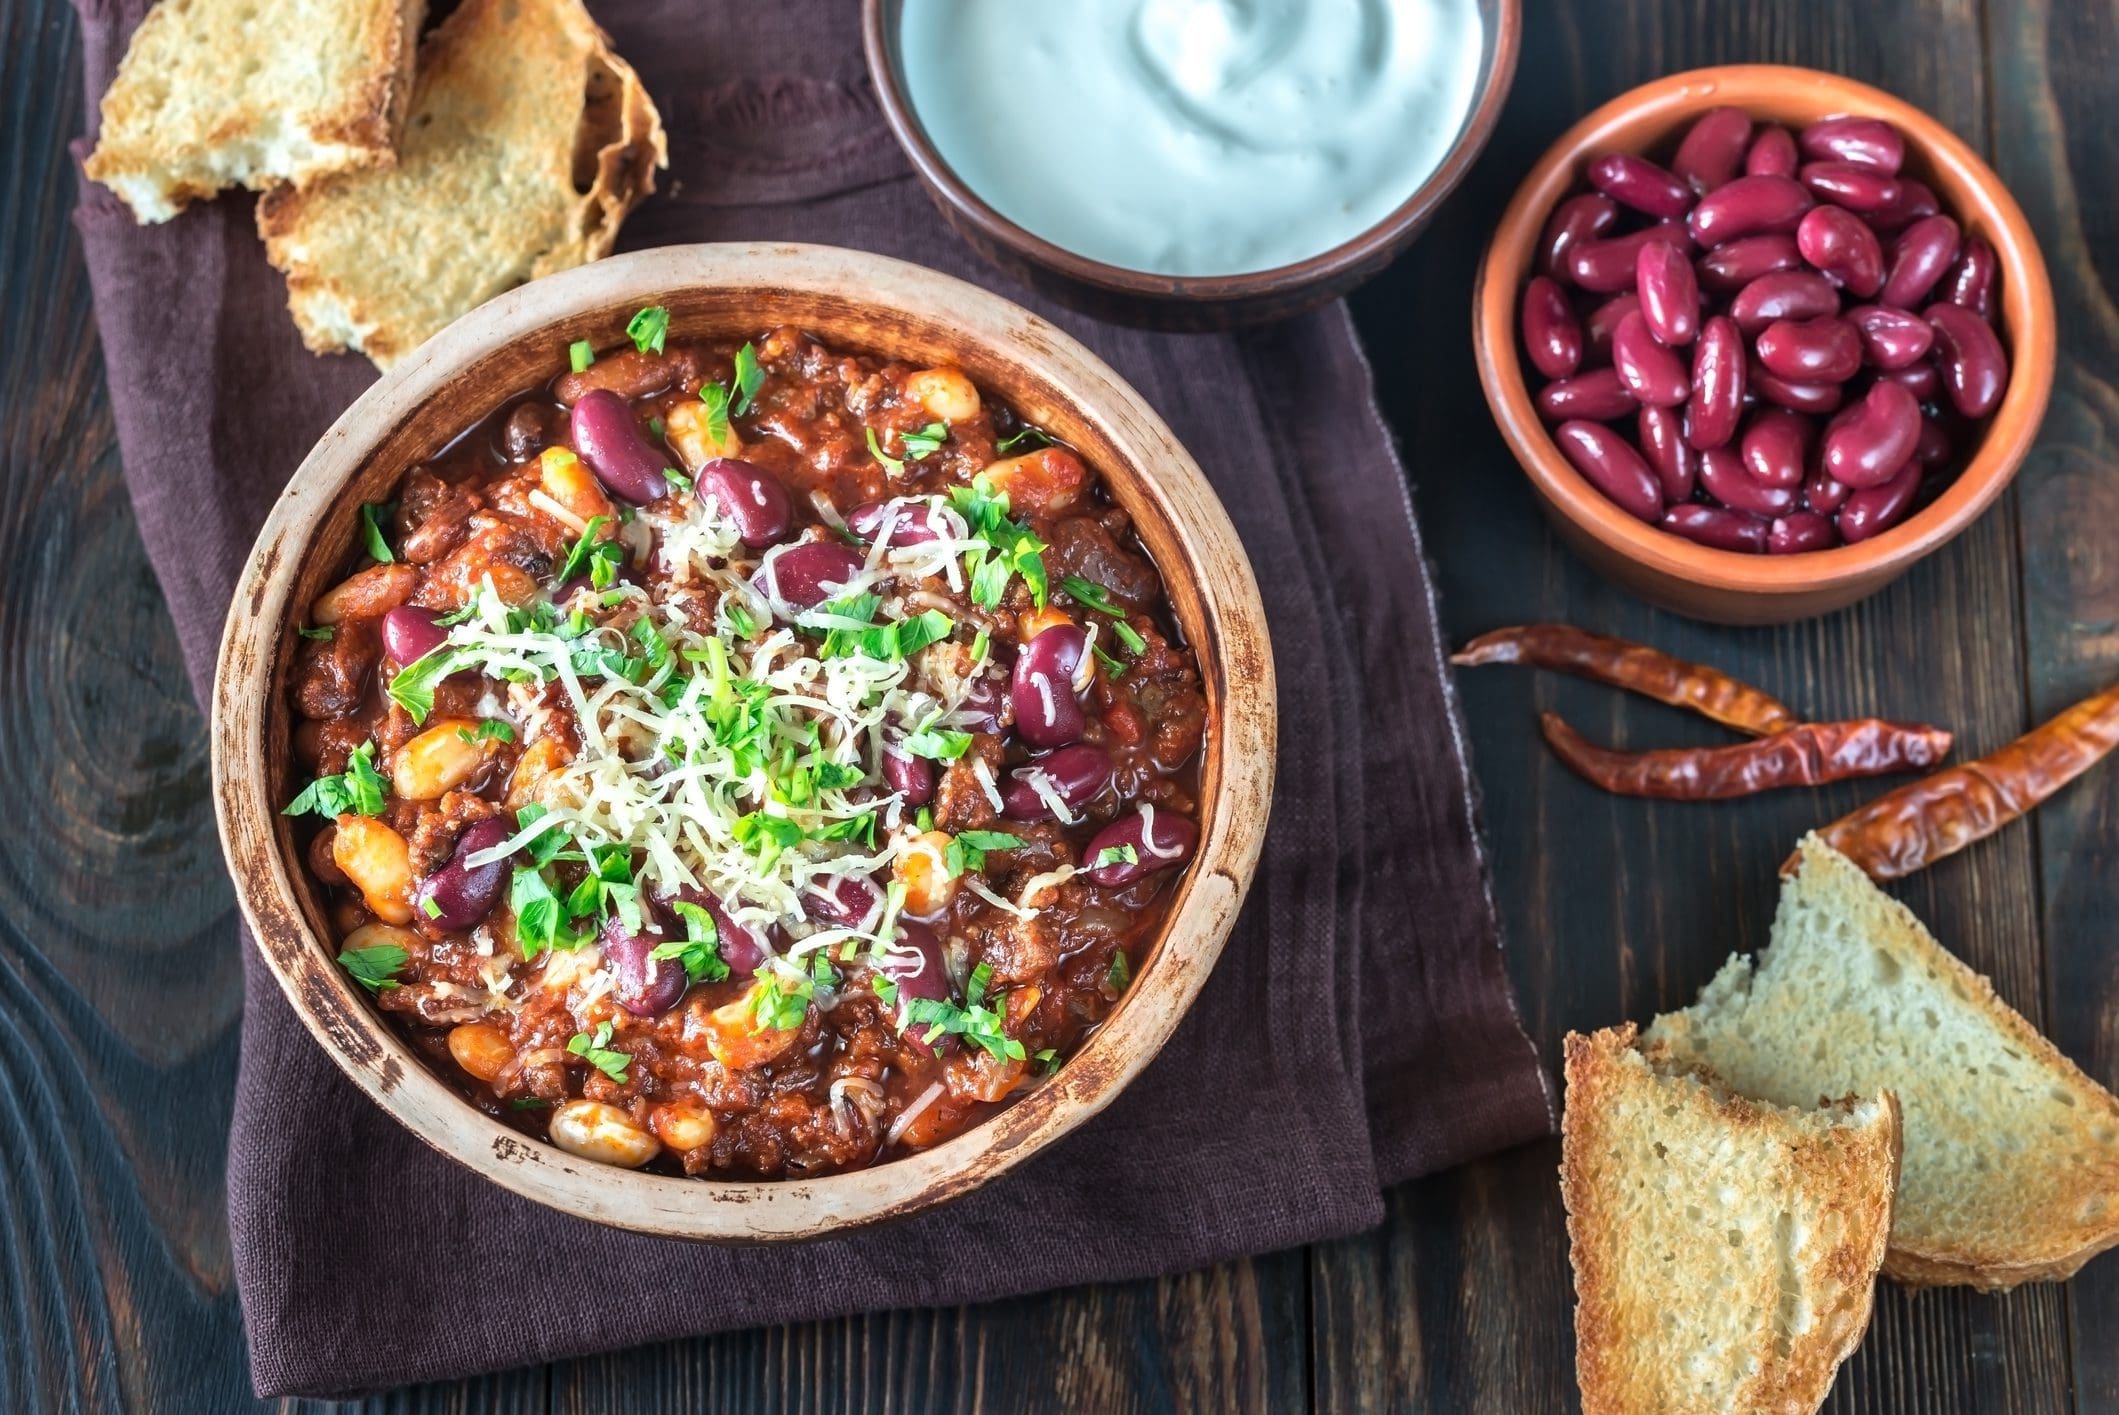 Slow Cooker Chili with Turkey and Sausage